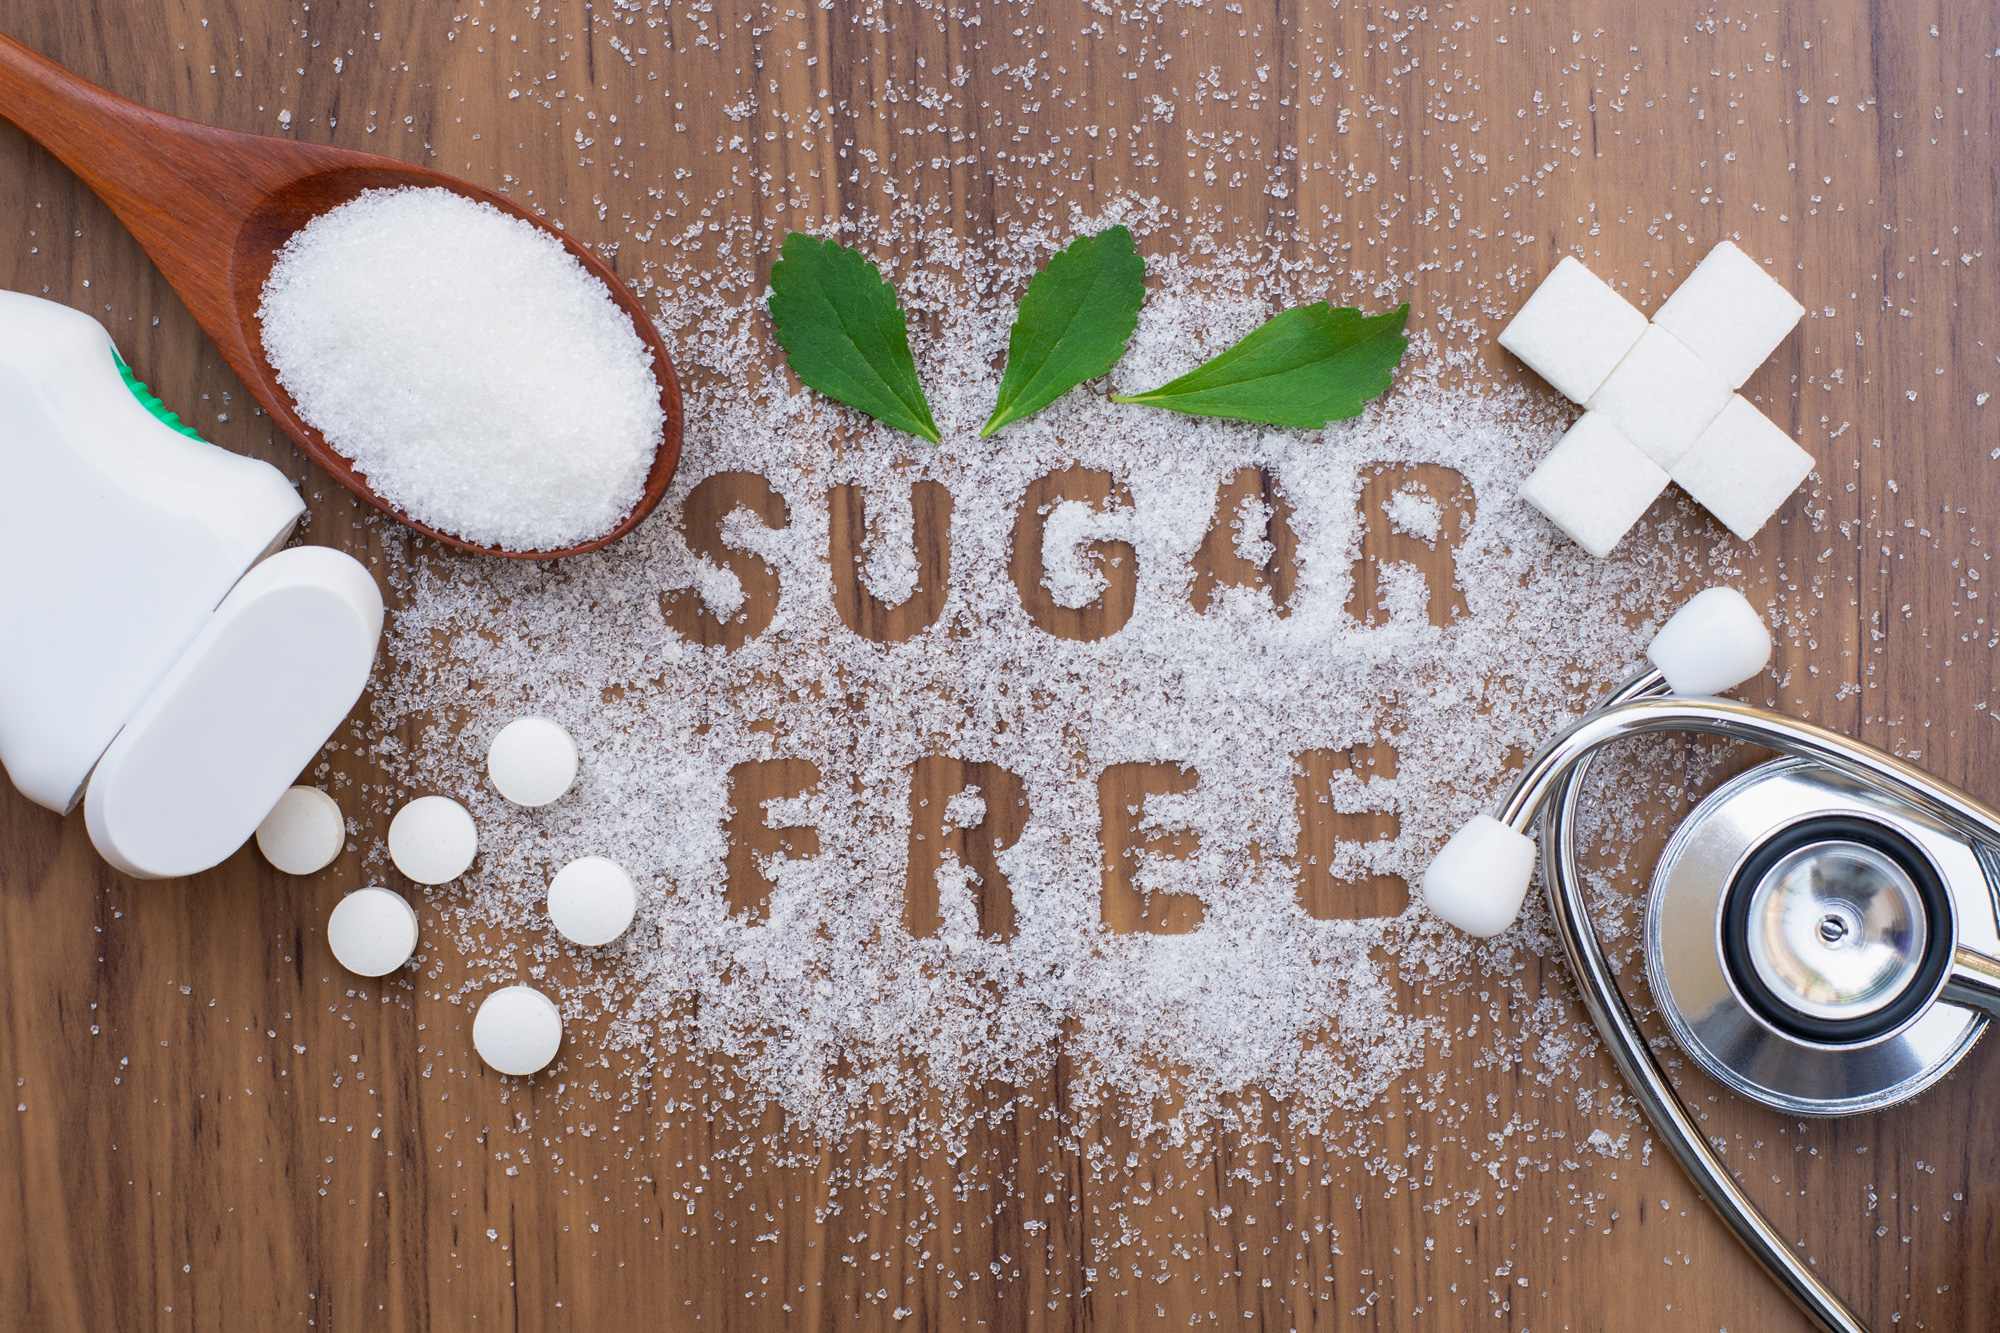 What Do “Sugar Free” Products Contain?